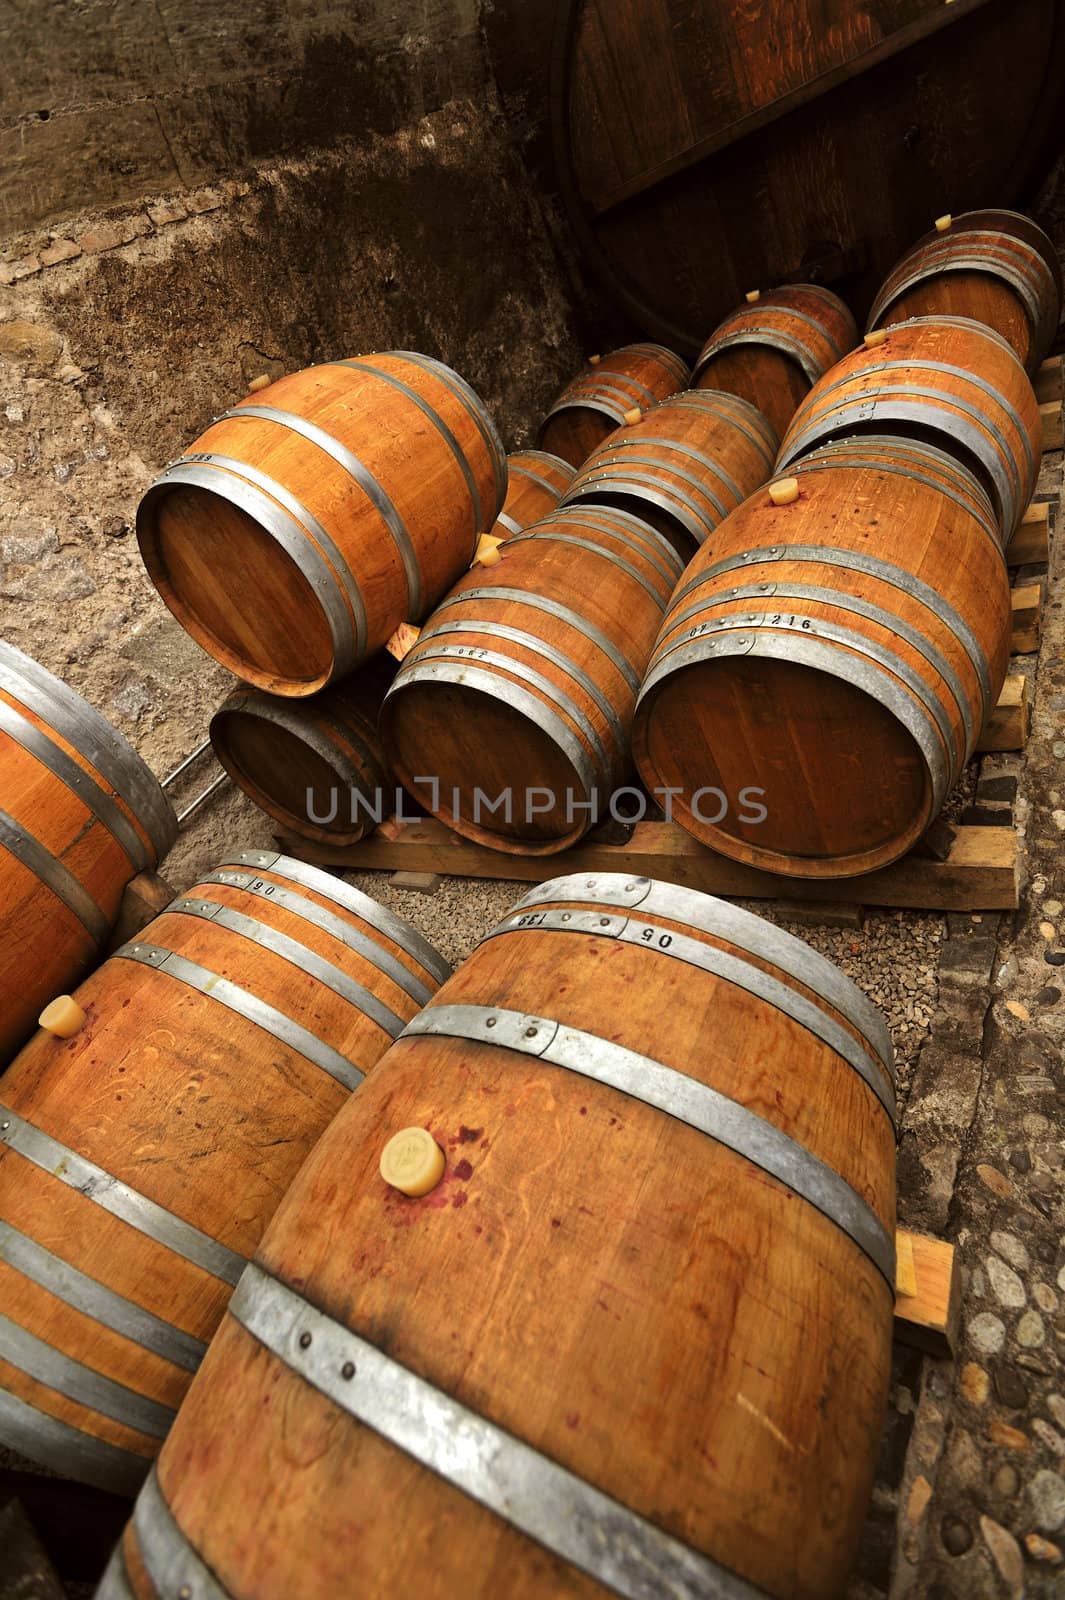 Traditional oaken barrels of fermenting wine in a Swiss wine-producer's cellar (cave). The Swiss do produce wine, lots of it. It's little known because they drink most of it themselves. Less than 2% is exported. Space for text in dark area at top.
